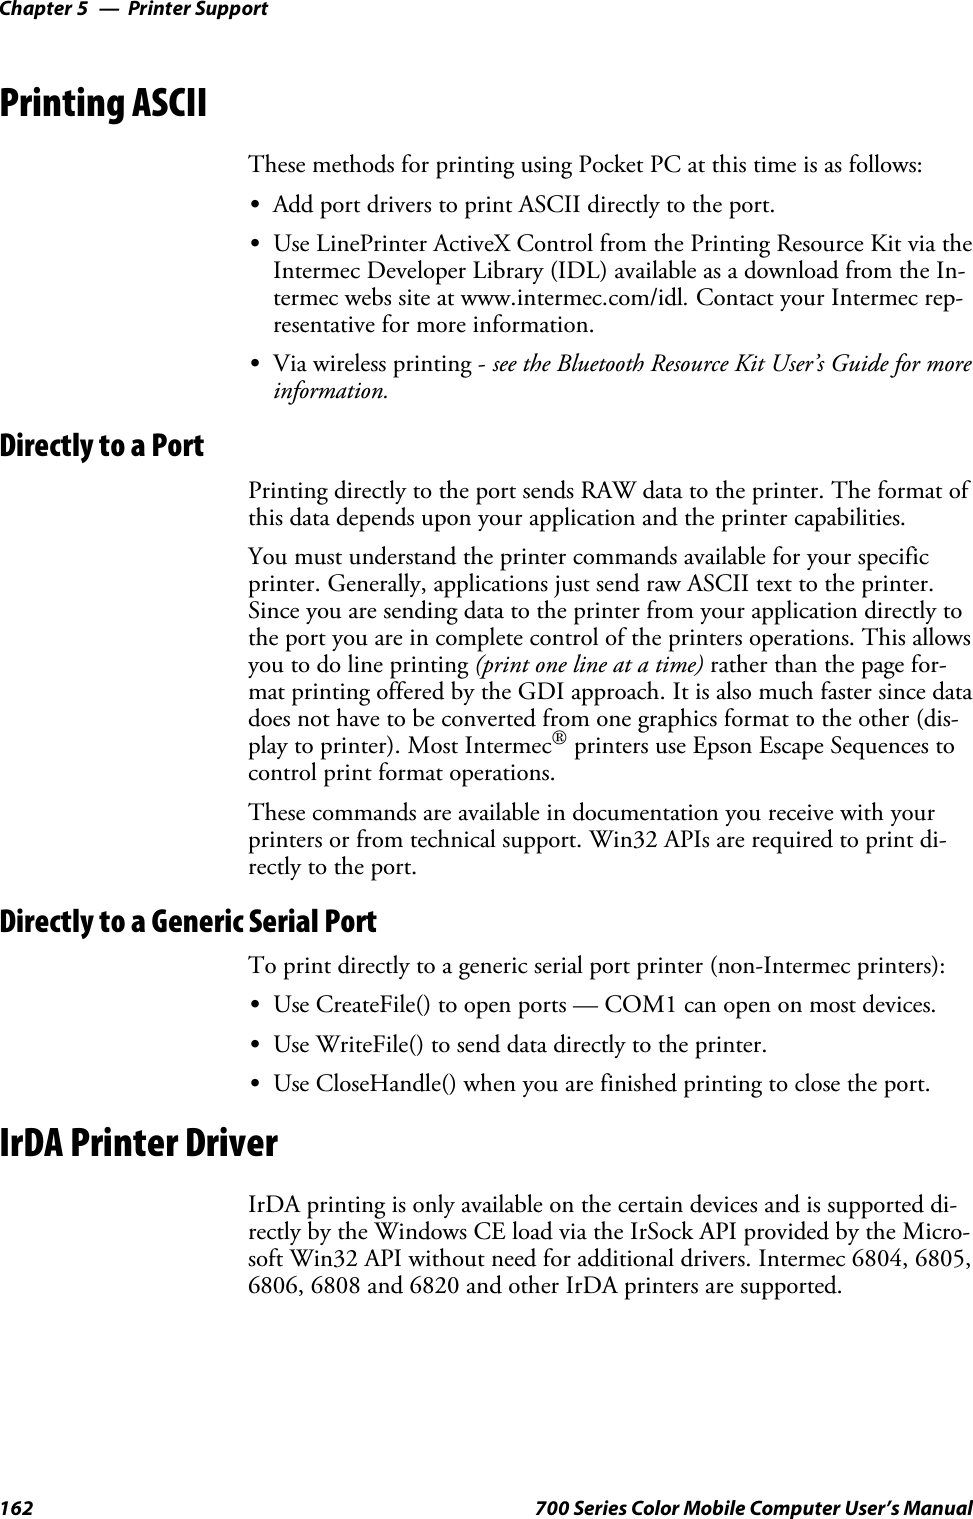 Printer SupportChapter —5162 700 Series Color Mobile Computer User’s ManualPrinting ASCIIThese methods for printing using Pocket PC at this time is as follows:SAdd port drivers to print ASCII directly to the port.SUse LinePrinter ActiveX Control from the Printing Resource Kit via theIntermec Developer Library (IDL) available as a download from the In-termec webs site at www.intermec.com/idl.Contact your Intermec rep-resentative for more information.SVia wireless printing - see the Bluetooth Resource Kit User’s Guide for moreinformation.Directly to a PortPrinting directly to the port sends RAW data to the printer. The format ofthis data depends upon your application and the printer capabilities.You must understand the printer commands available for your specificprinter. Generally, applications just send raw ASCII text to the printer.Since you are sending data to the printer from your application directly tothe port you are in complete control of the printers operations. This allowsyoutodolineprinting(print one line at a time) rather than the page for-mat printing offered by the GDI approach. It is also much faster since datadoes not have to be converted from one graphics format to the other (dis-play to printer). Most Intermec®printers use Epson Escape Sequences tocontrol print format operations.These commands are available in documentation you receive with yourprinters or from technical support. Win32 APIs are required to print di-rectly to the port.Directly to a Generic Serial PortTo print directly to a generic serial port printer (non-Intermec printers):SUse CreateFile() to open ports — COM1 can open on most devices.SUse WriteFile() to send data directly to the printer.SUse CloseHandle() when you are finished printing to close the port.IrDA Printer DriverIrDA printing is only available on the certain devices and is supported di-rectly by the Windows CE load via the IrSock API provided by the Micro-soft Win32 API without need for additional drivers. Intermec 6804, 6805,6806, 6808 and 6820 and other IrDA printers are supported.